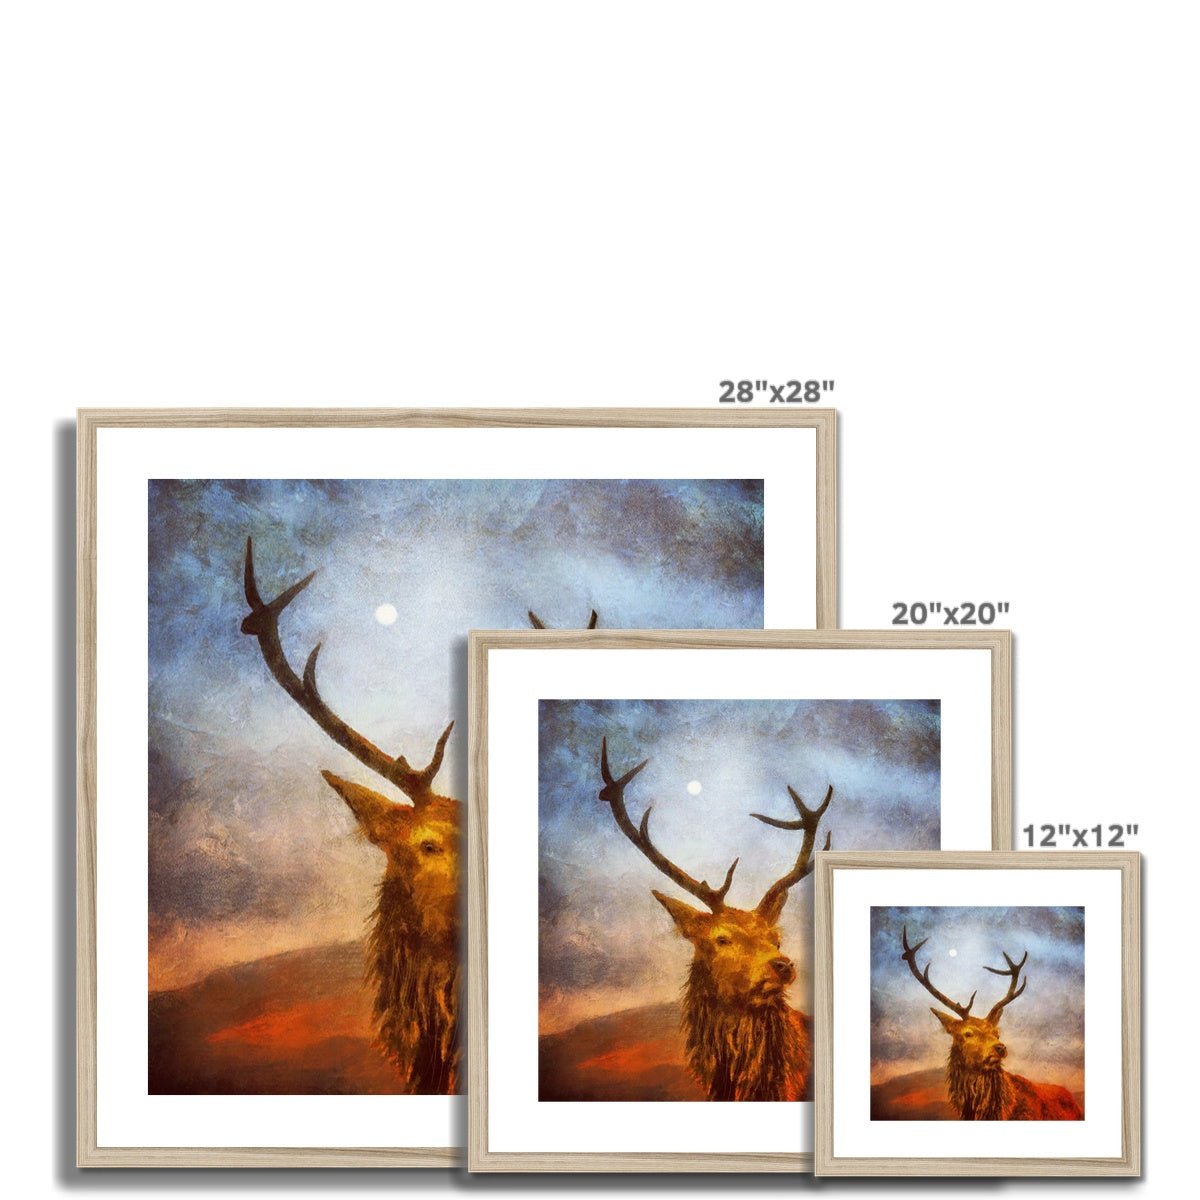 A Moonlit Highland Stag Painting | Framed & Mounted Prints From Scotland-Framed & Mounted Prints-Scottish Highlands & Lowlands Art Gallery-Paintings, Prints, Homeware, Art Gifts From Scotland By Scottish Artist Kevin Hunter